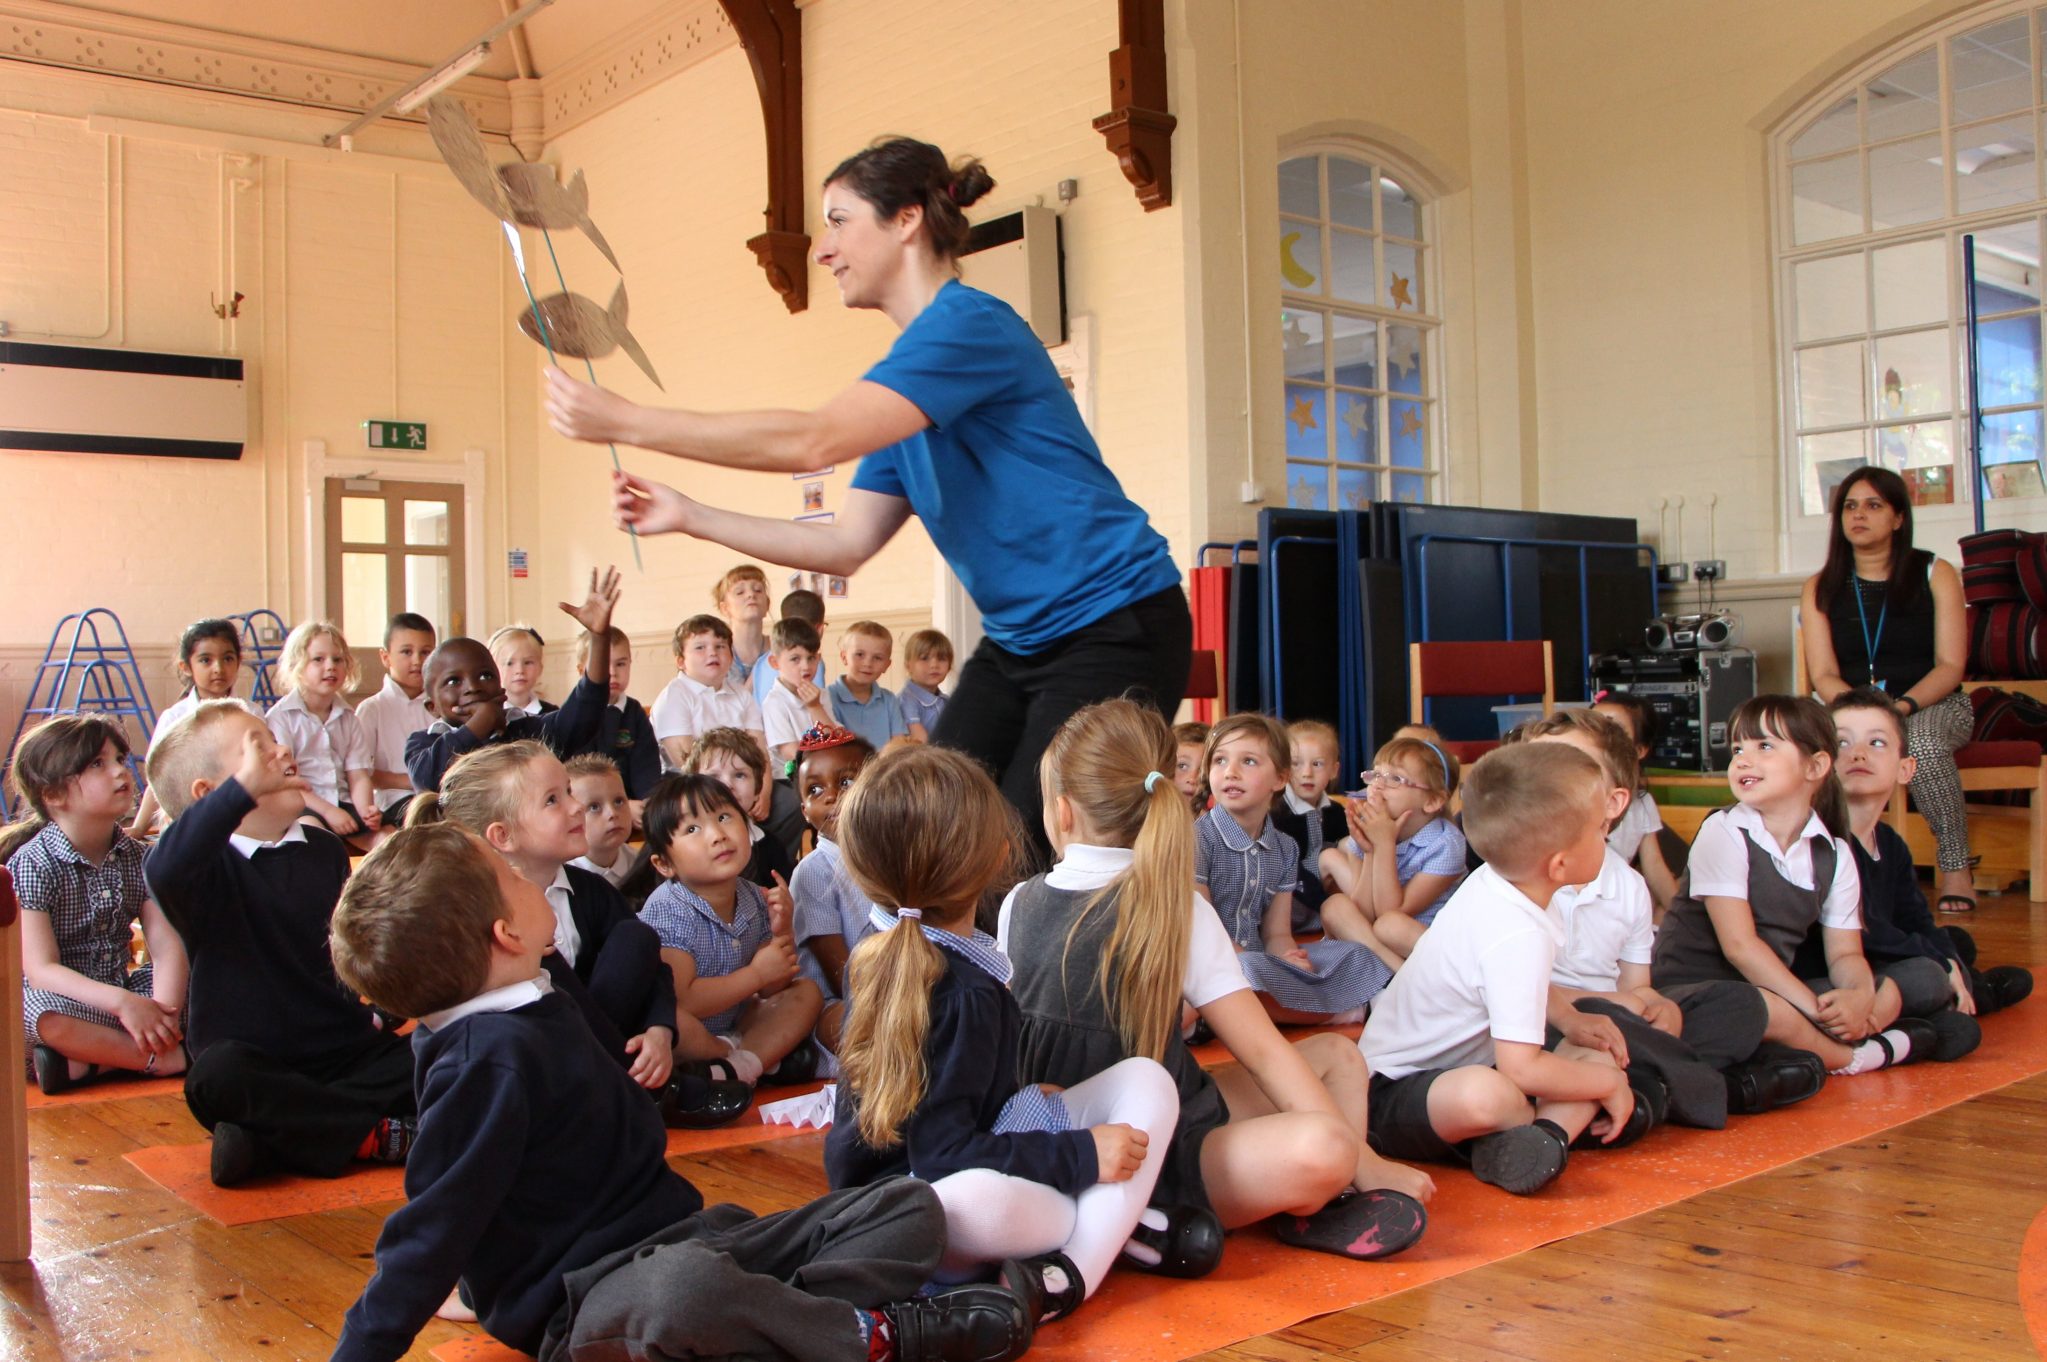 Emotional well being show for primary schools